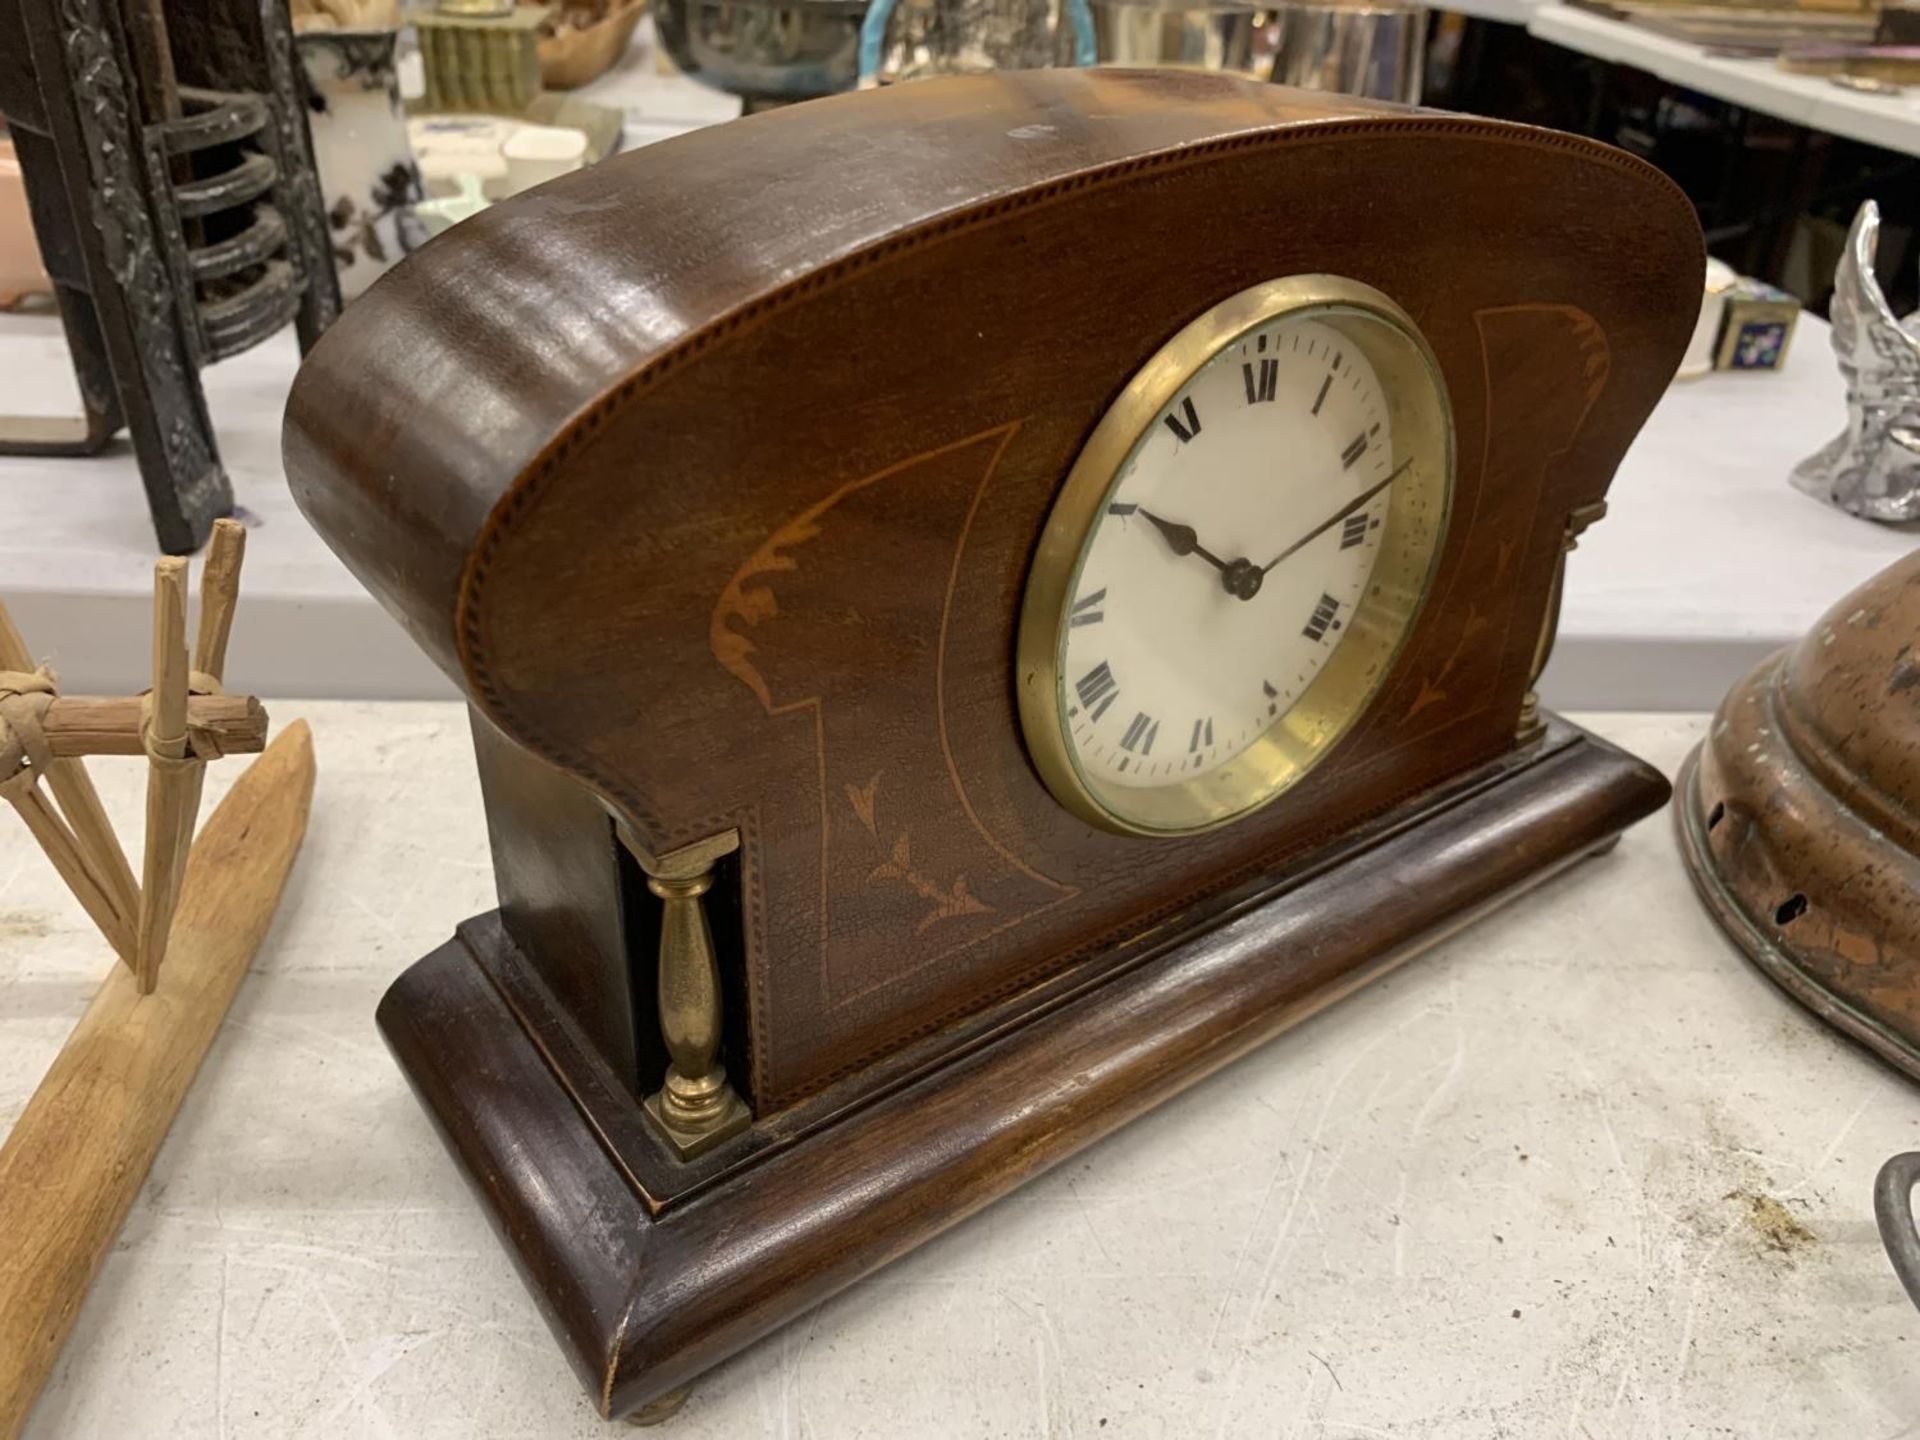 A JAPY FRERES FRENCH MANTLE CLOCK WITH KEY HEIGHT 18CM, LENGTH 27CM - Image 2 of 4